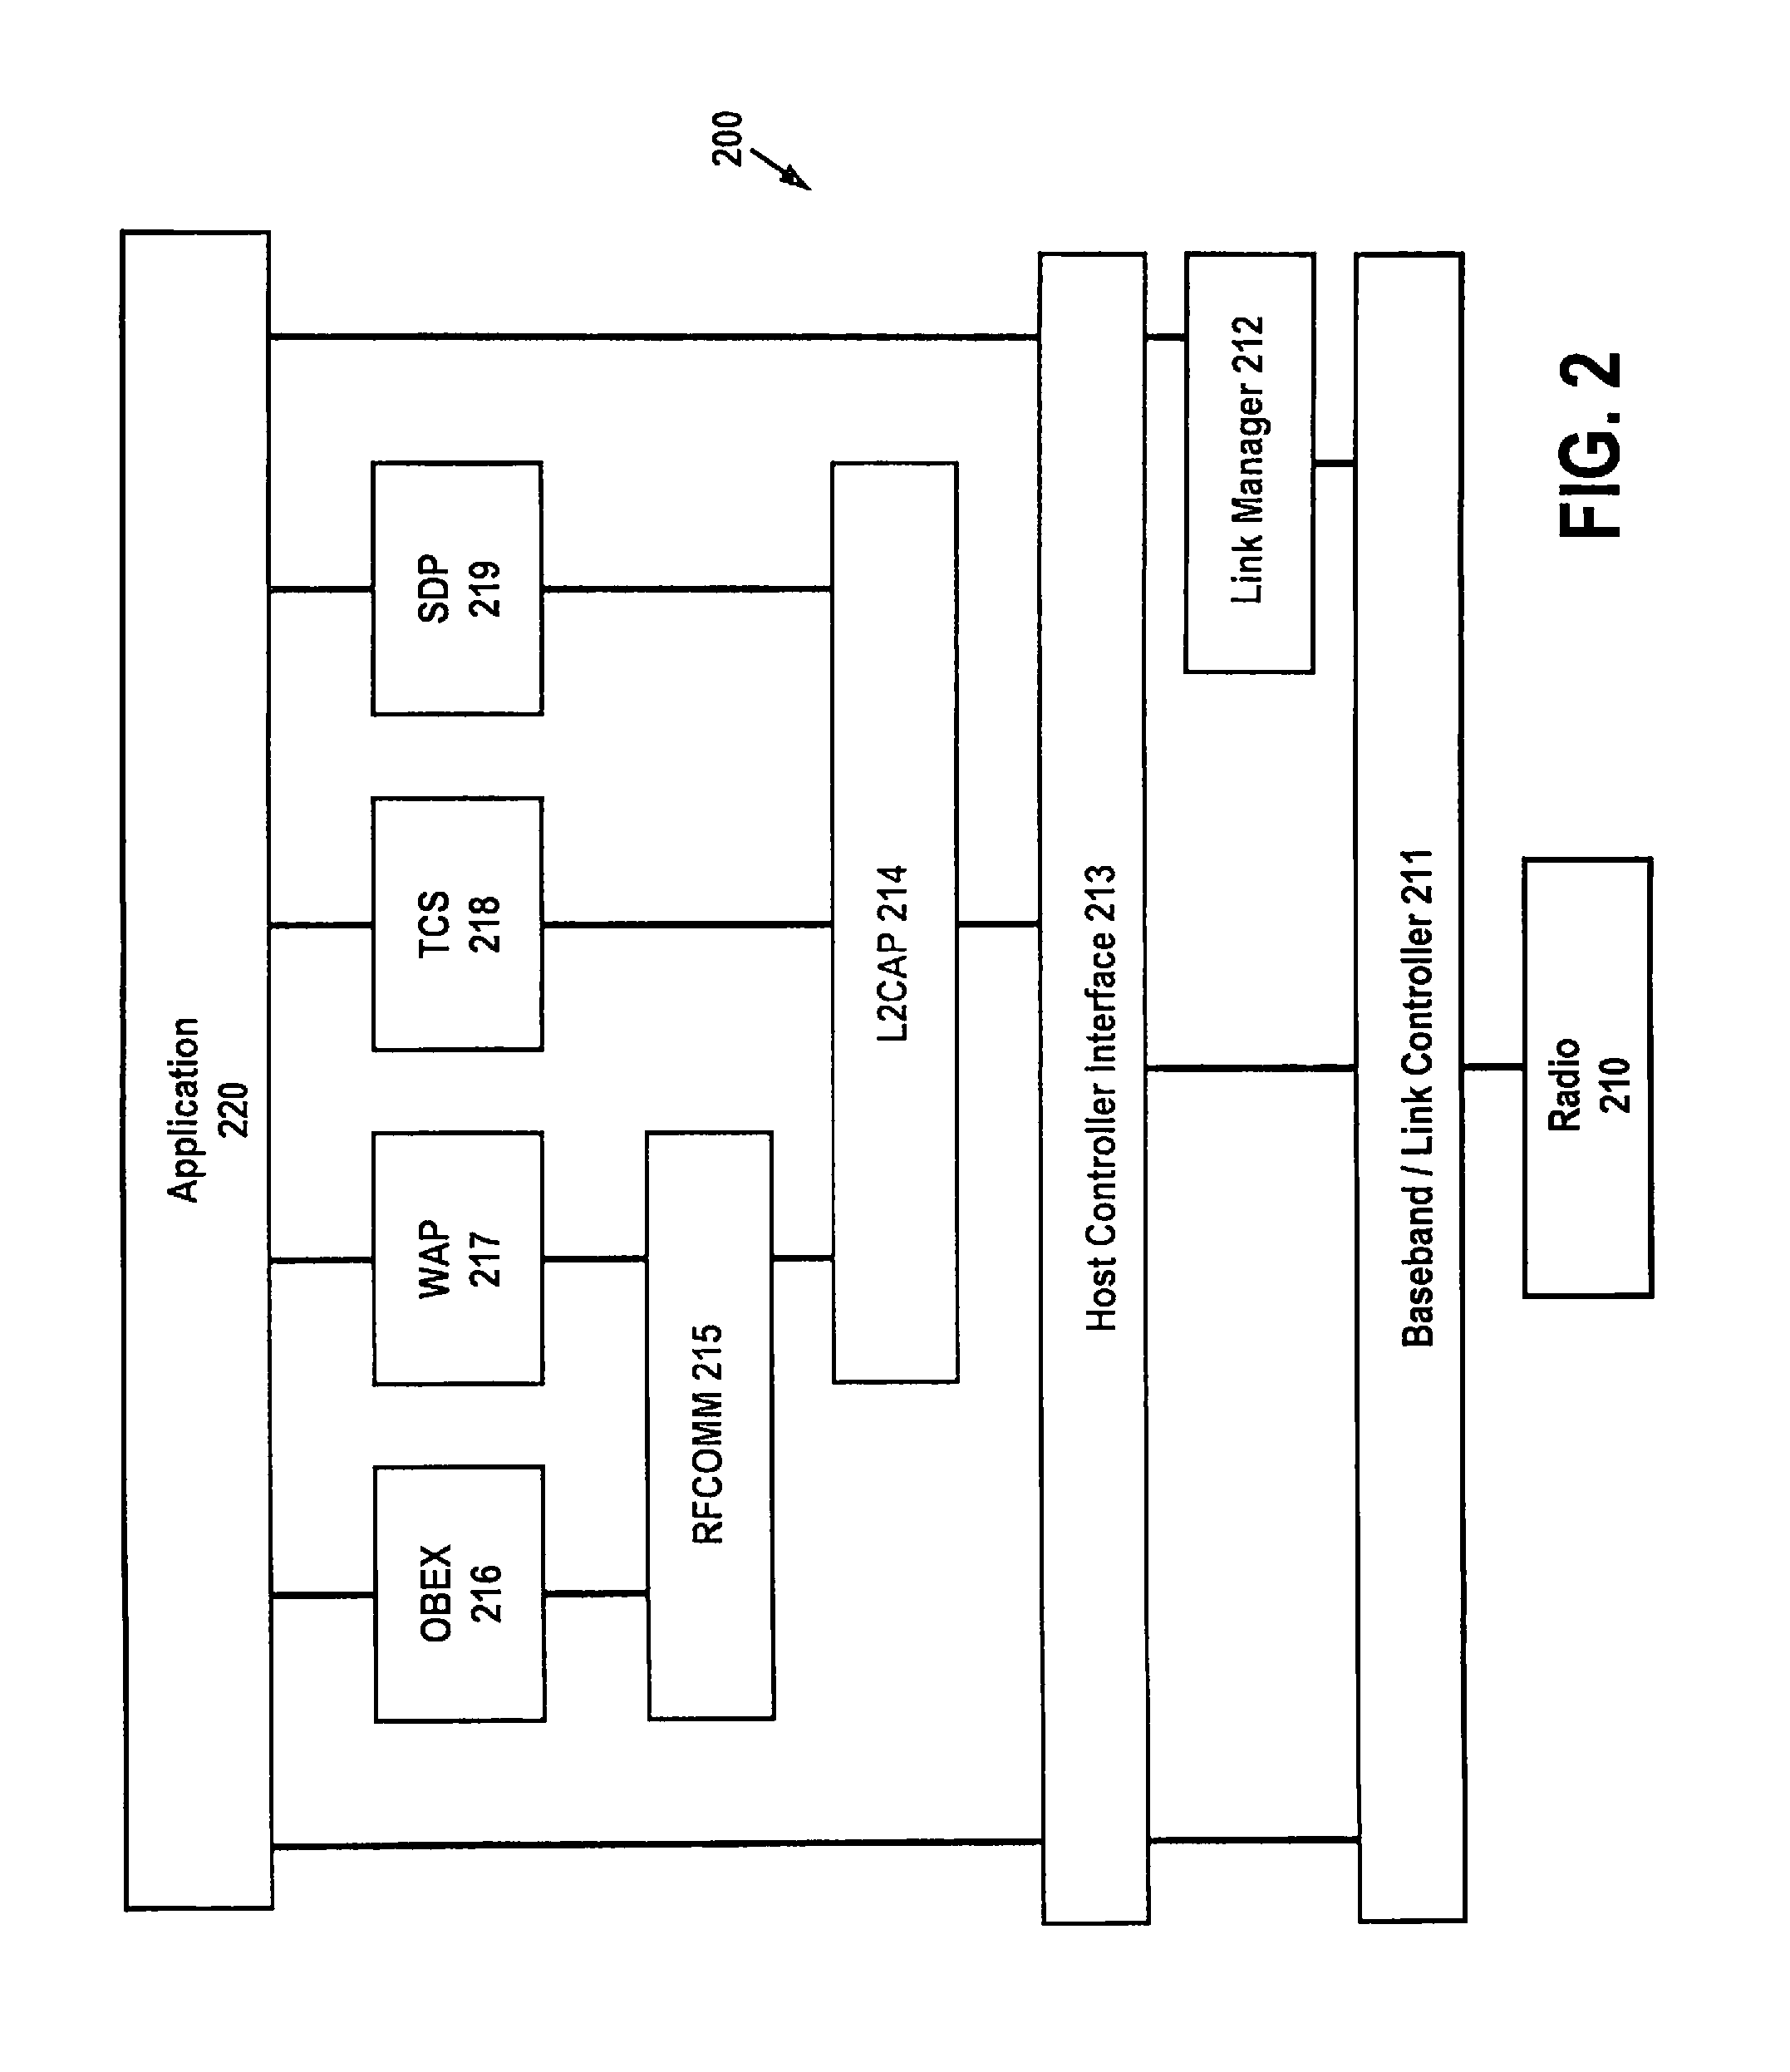 Systems and Methods for Presence Detection and Linking to Media Exposure Data